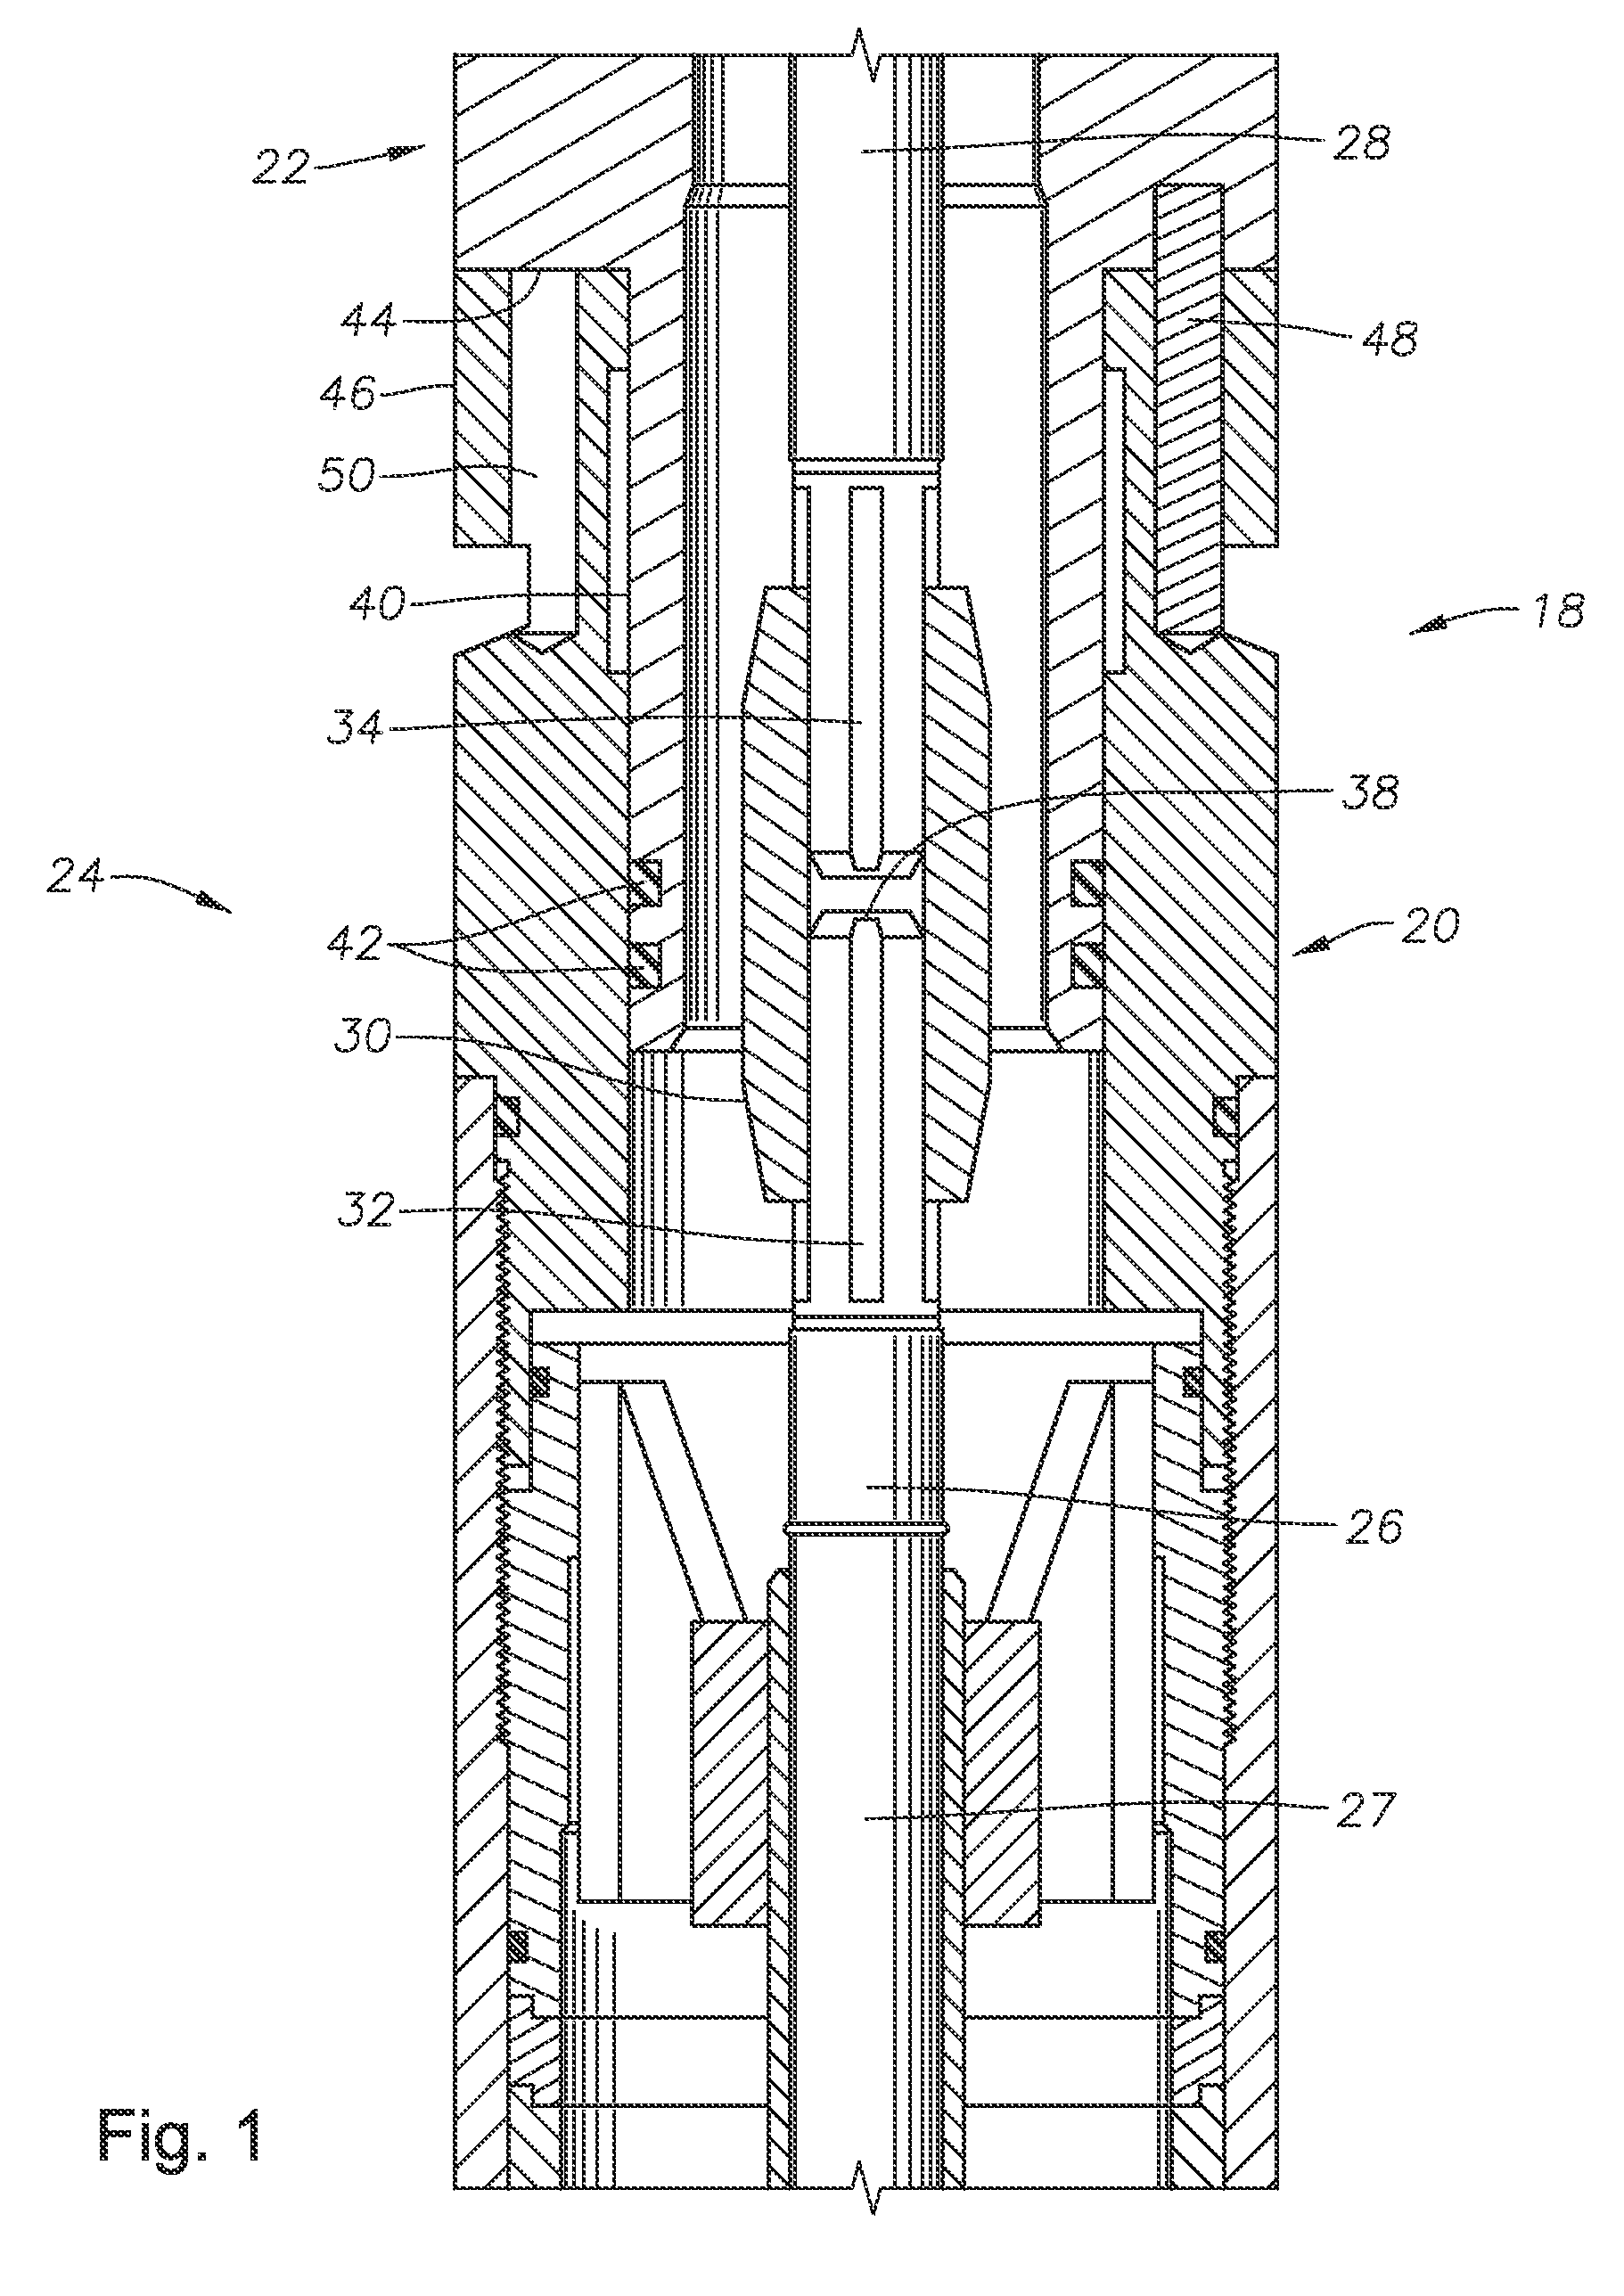 Connection assembly for through tubing conveyed submersible pumps